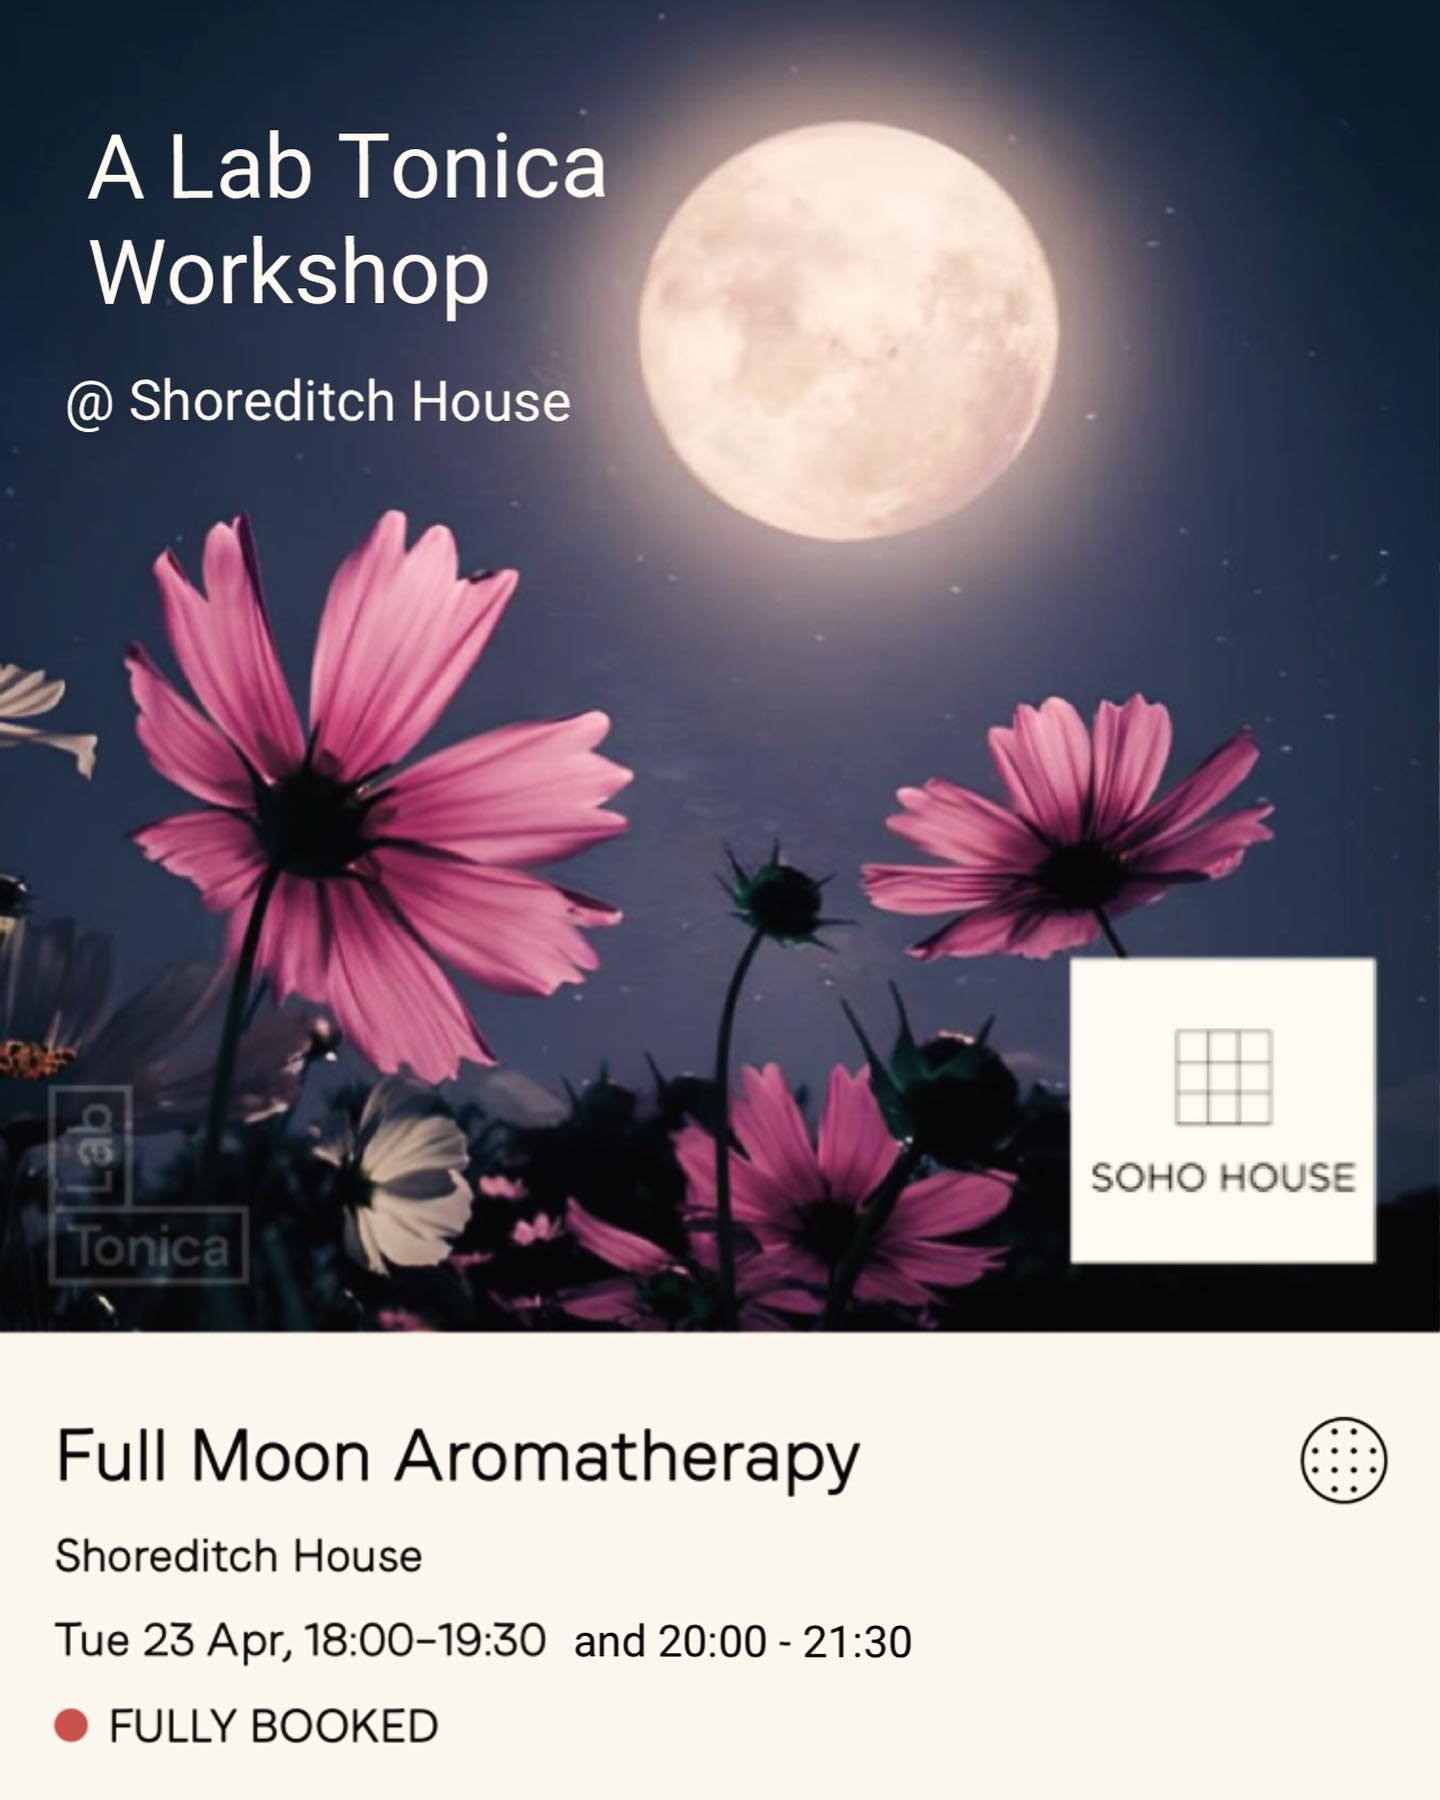 💕🌕 🌸 TWO FREE TICKETS 🎟️🎟️
Next Tuesday is a pink full moon and I&rsquo;m excited to be hosting two mystical aromatherapy workshops at Shoreditch House. An auspicious moment marking the celebration of Spring blossoms we will be exploring floral 